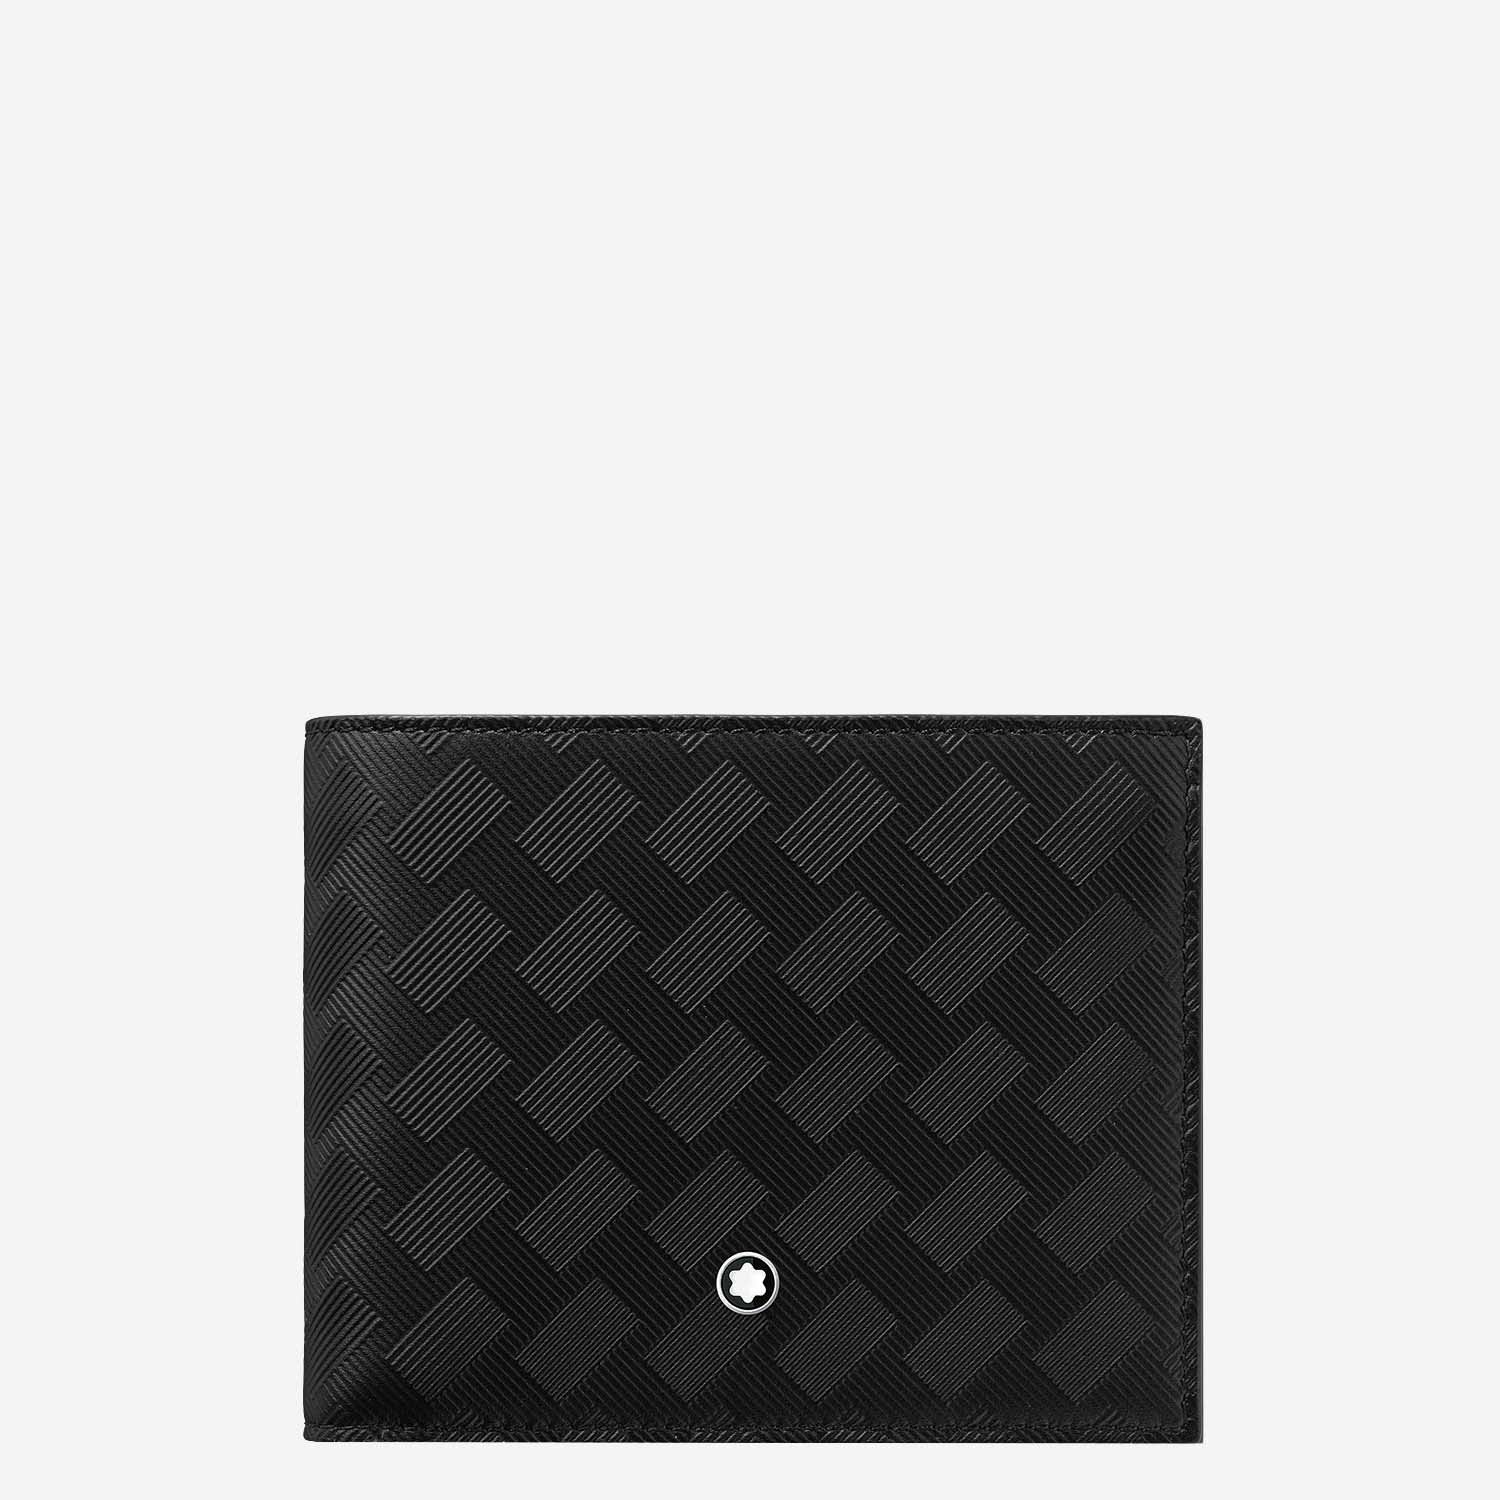 MONTBLANC MONTBLANC EXTREME 3.0 6 COMPARTMENT WALLET